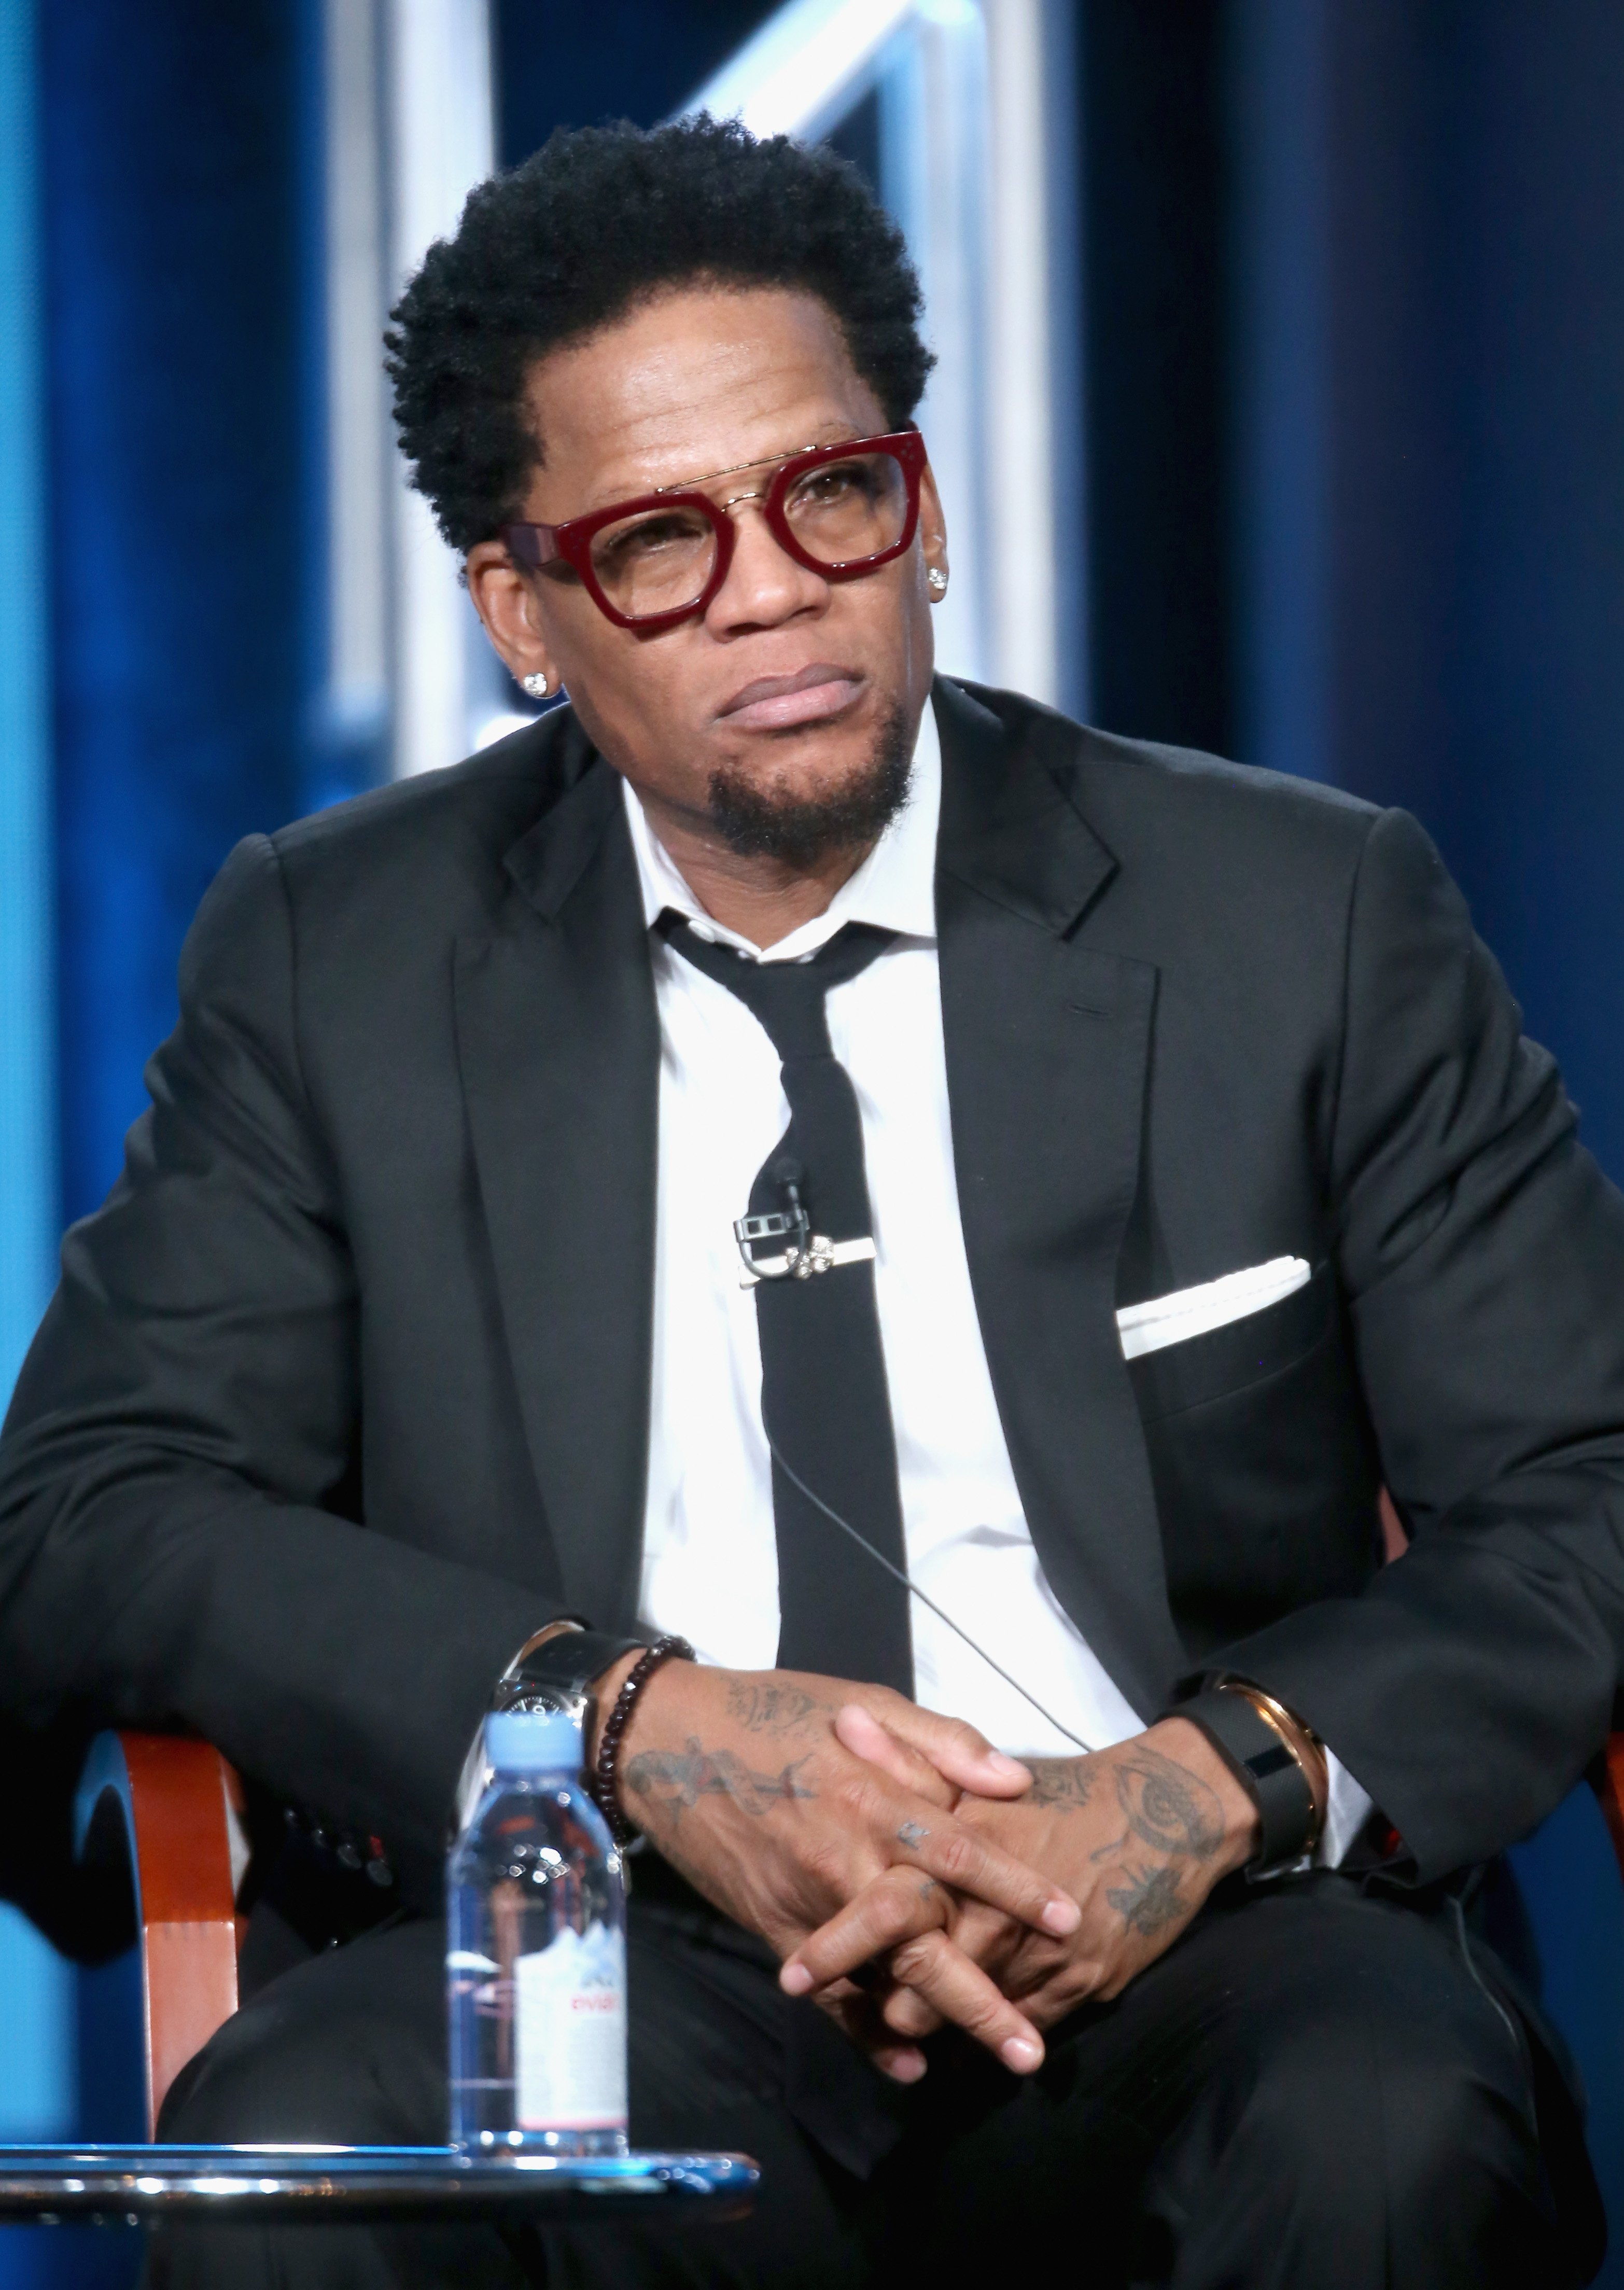 D.L. Hughley speaking onstage at NBC Universal's "Heartbeat" panel discussion during the 2015 Winter TCA Tour. | Photo: Getty Images